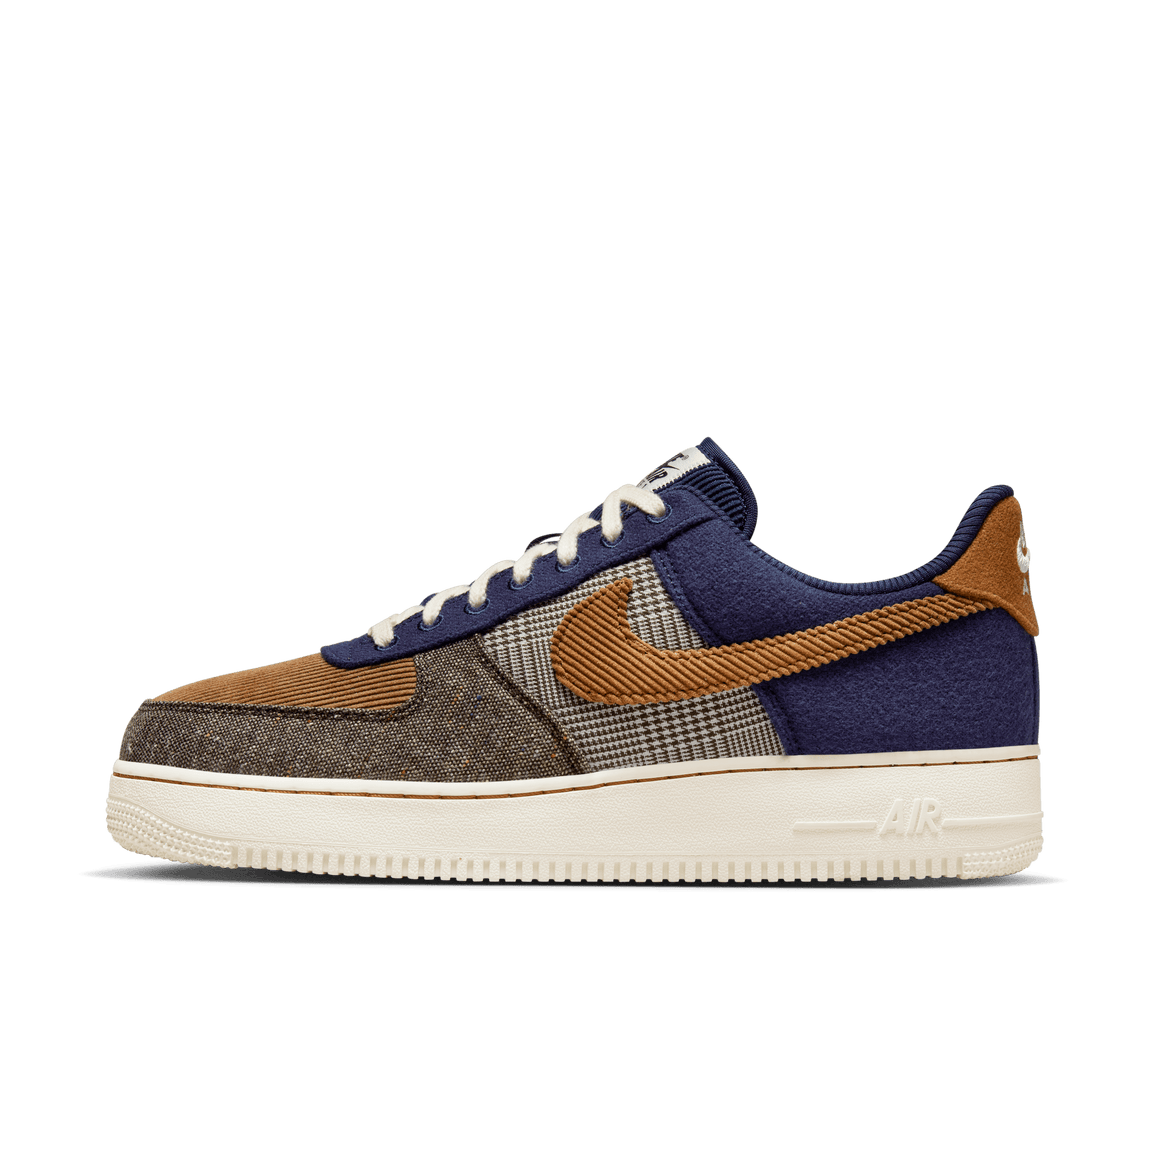 Nike Air Force 1 '07 Premium ( Midnight Navy / Ale Brown / Ivory ) - Nike Air Force 1 '07 Premium ( Midnight Navy / Ale Brown / Ivory ) - 